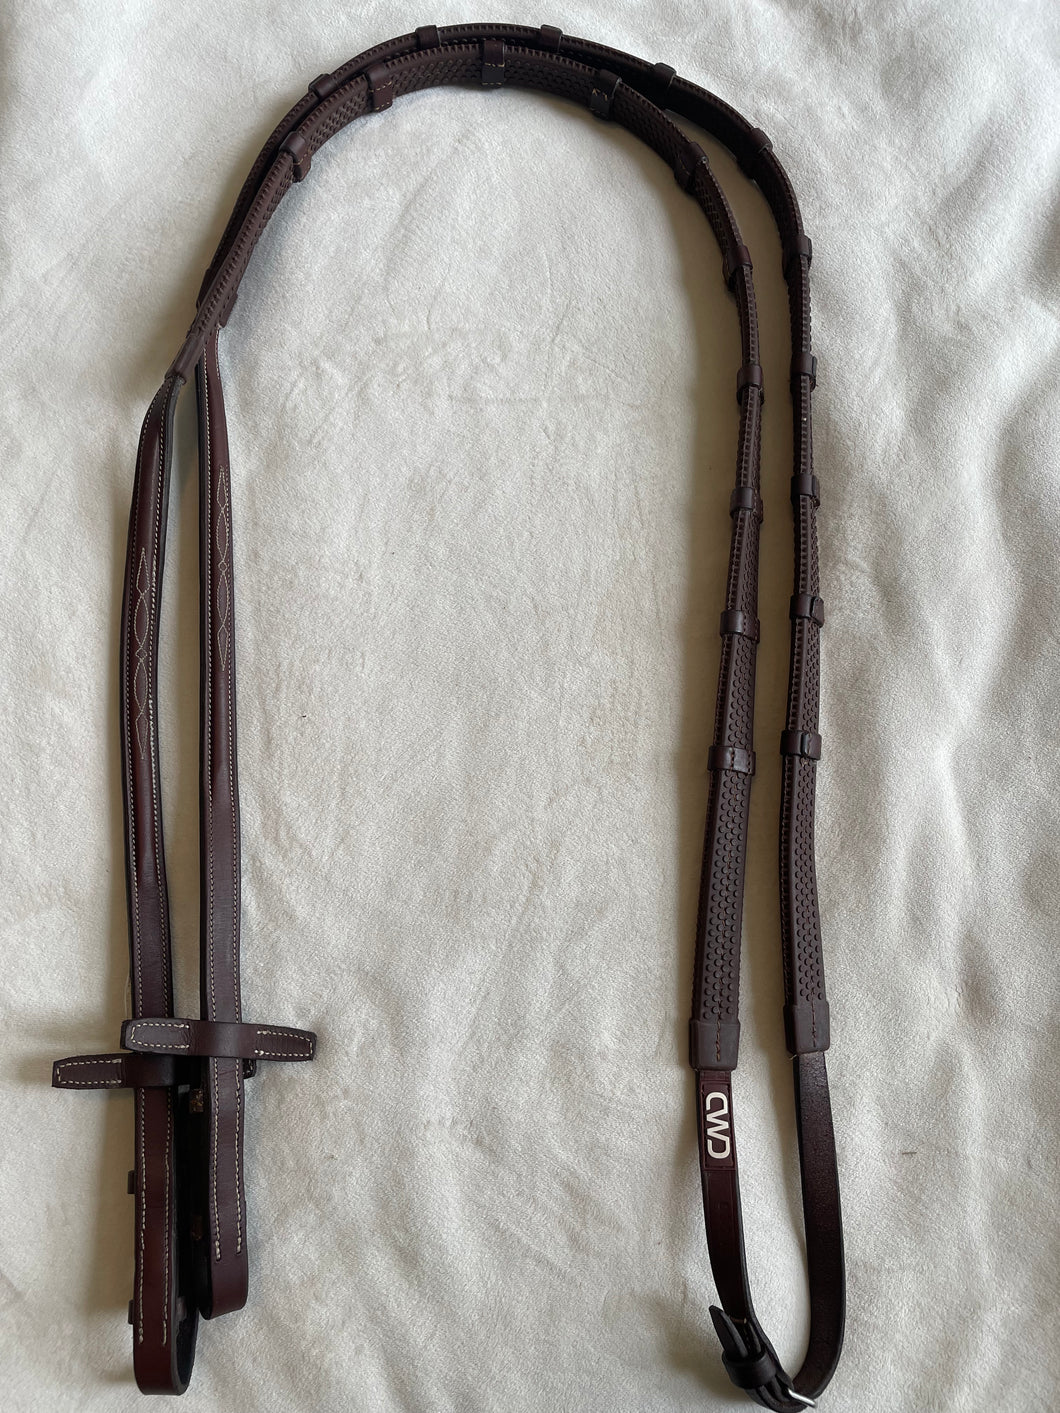 CWD Raised Rubber Reins w/ Fancy Stitching - Size 3 (Full Horse) - Demo Condition